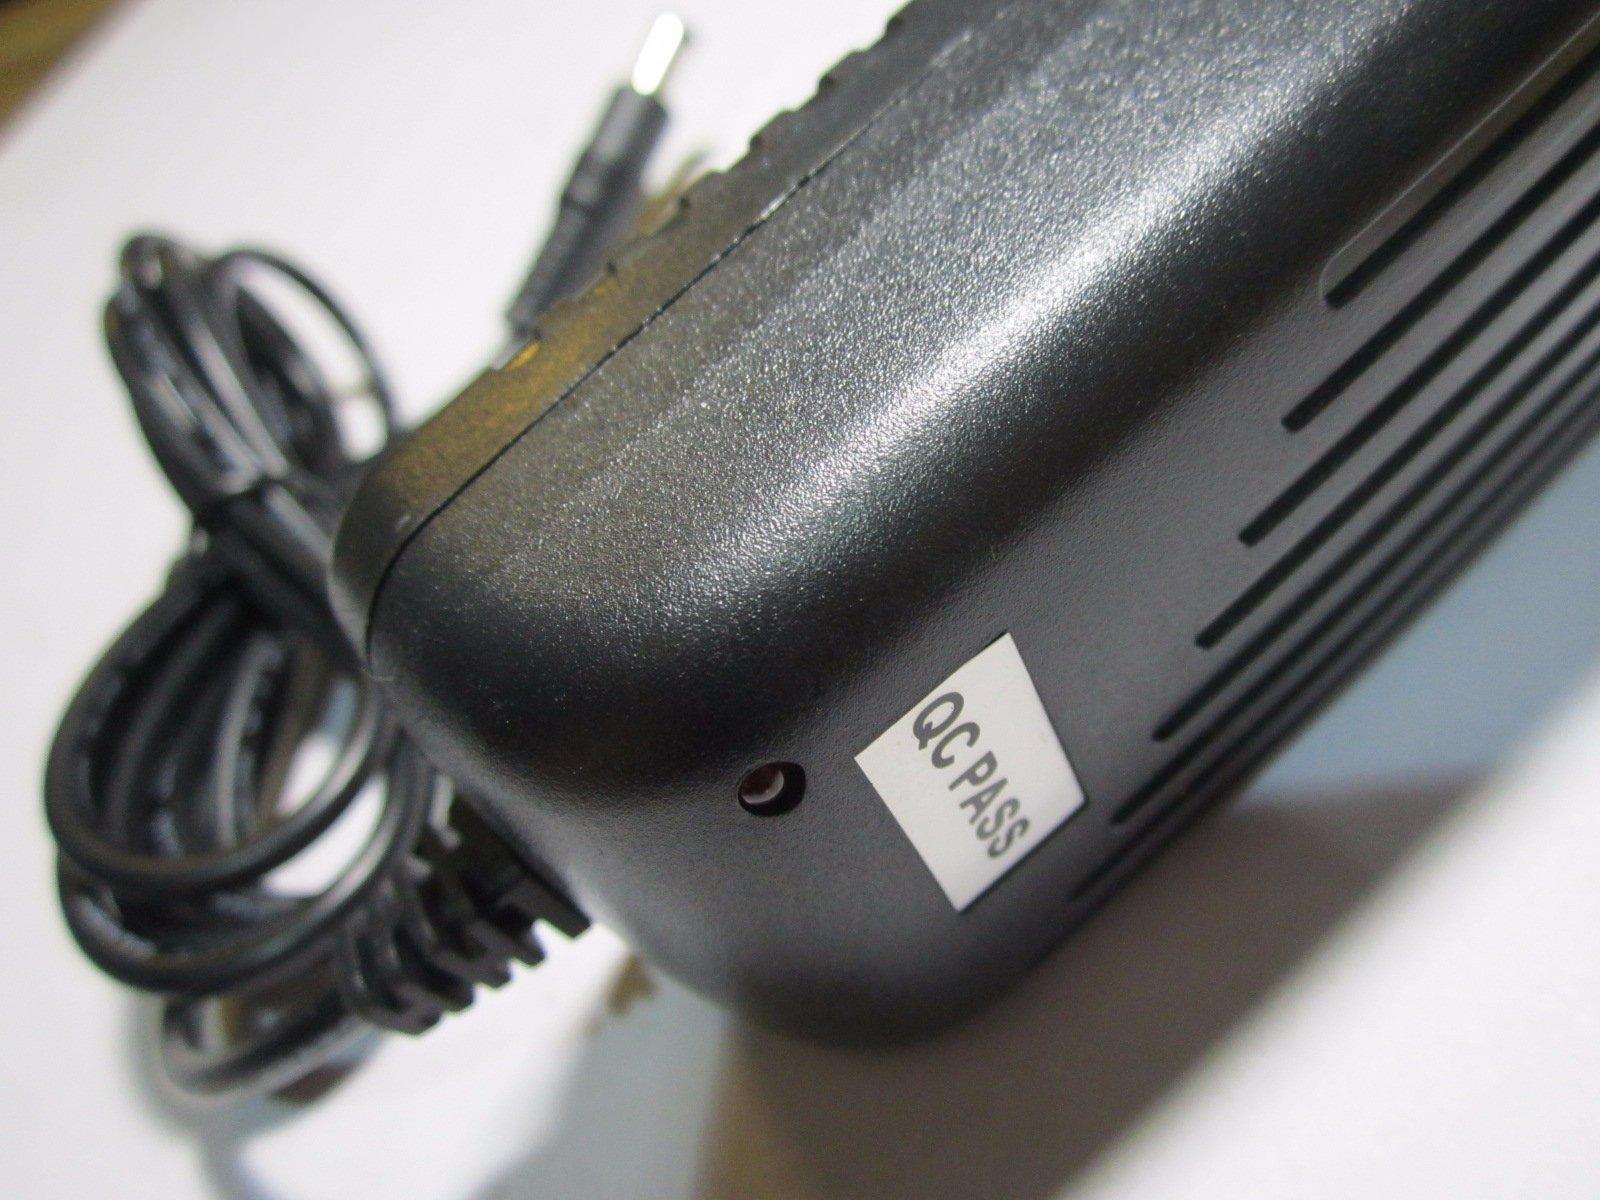 12V 800mA Mains AC-DC Adaptor Power Supply for Sharp XE-A107 Cash Register Till Type: Power Adapter Max. Output Power